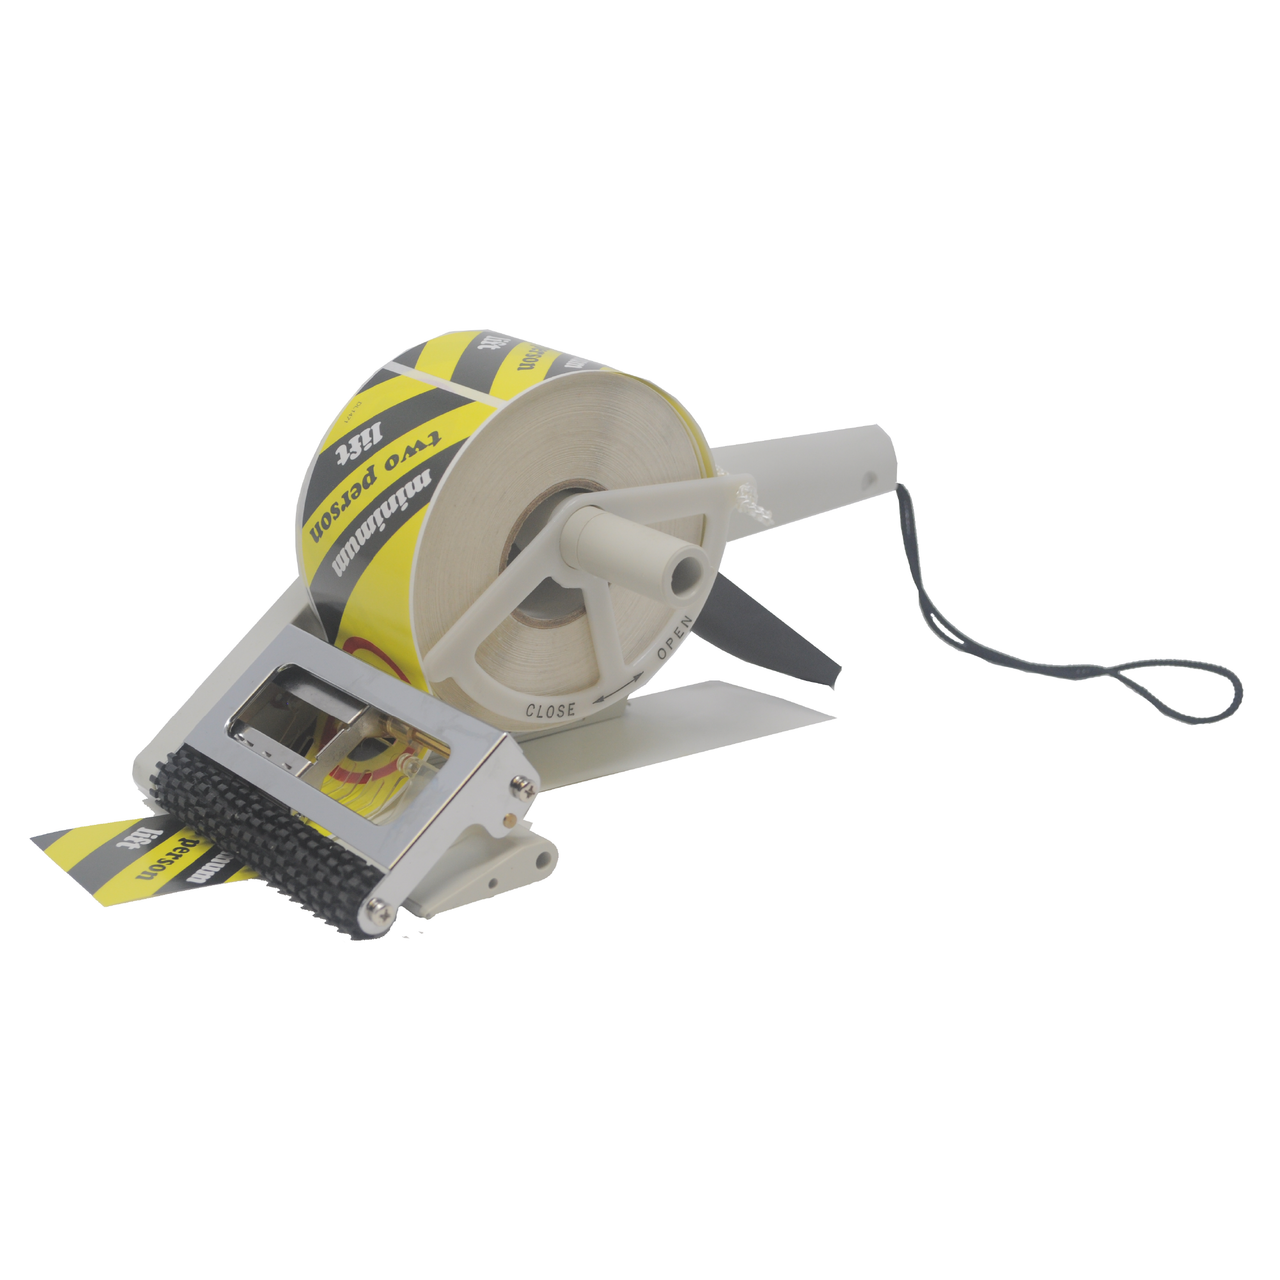 AP65-30 - Hand-Held Label Applicator Machine (Up to 1.2 inch wide